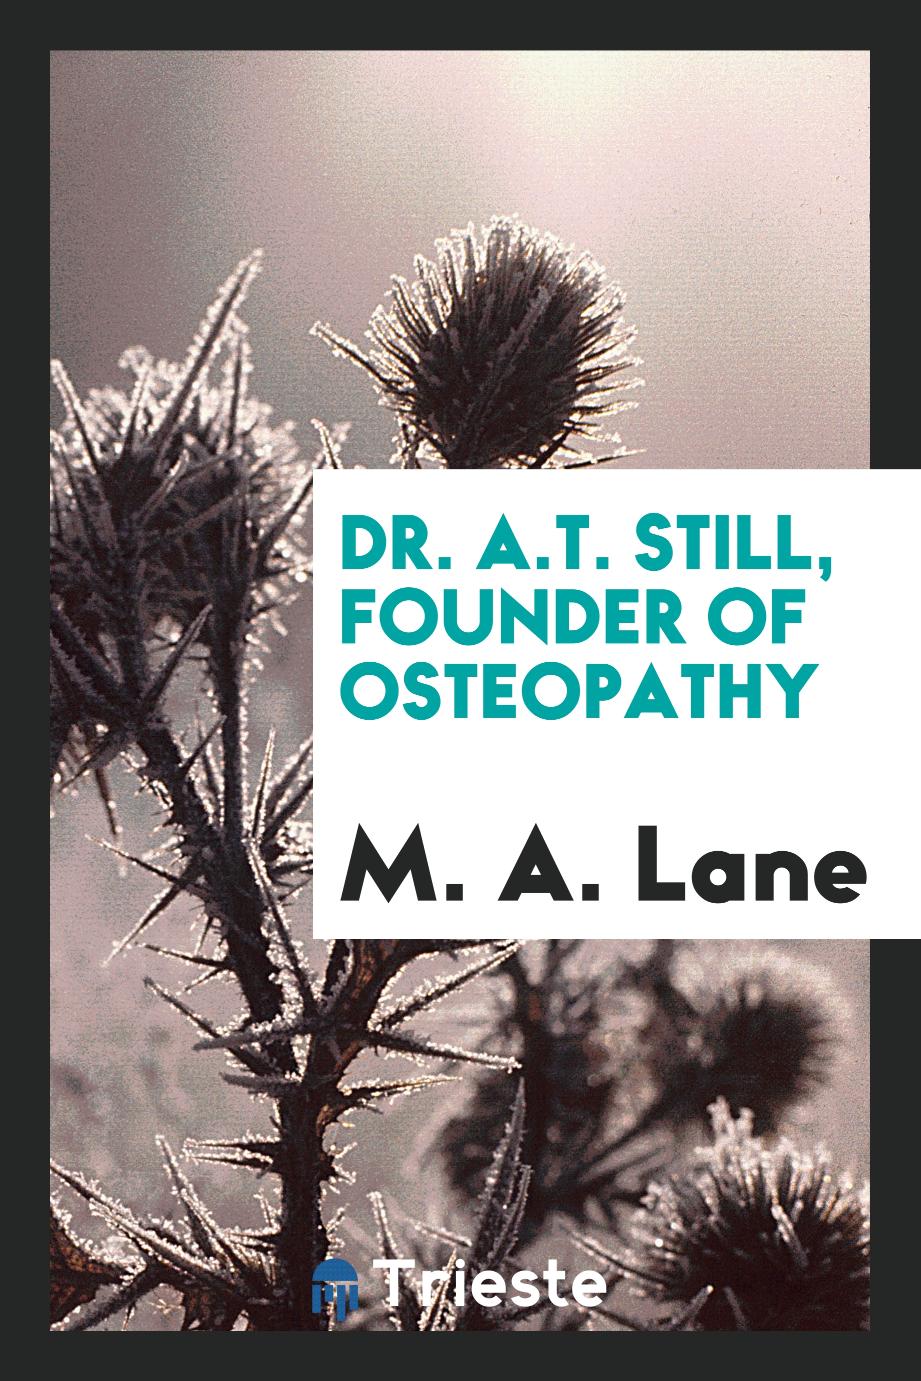 Dr. A.T. Still, founder of osteopathy